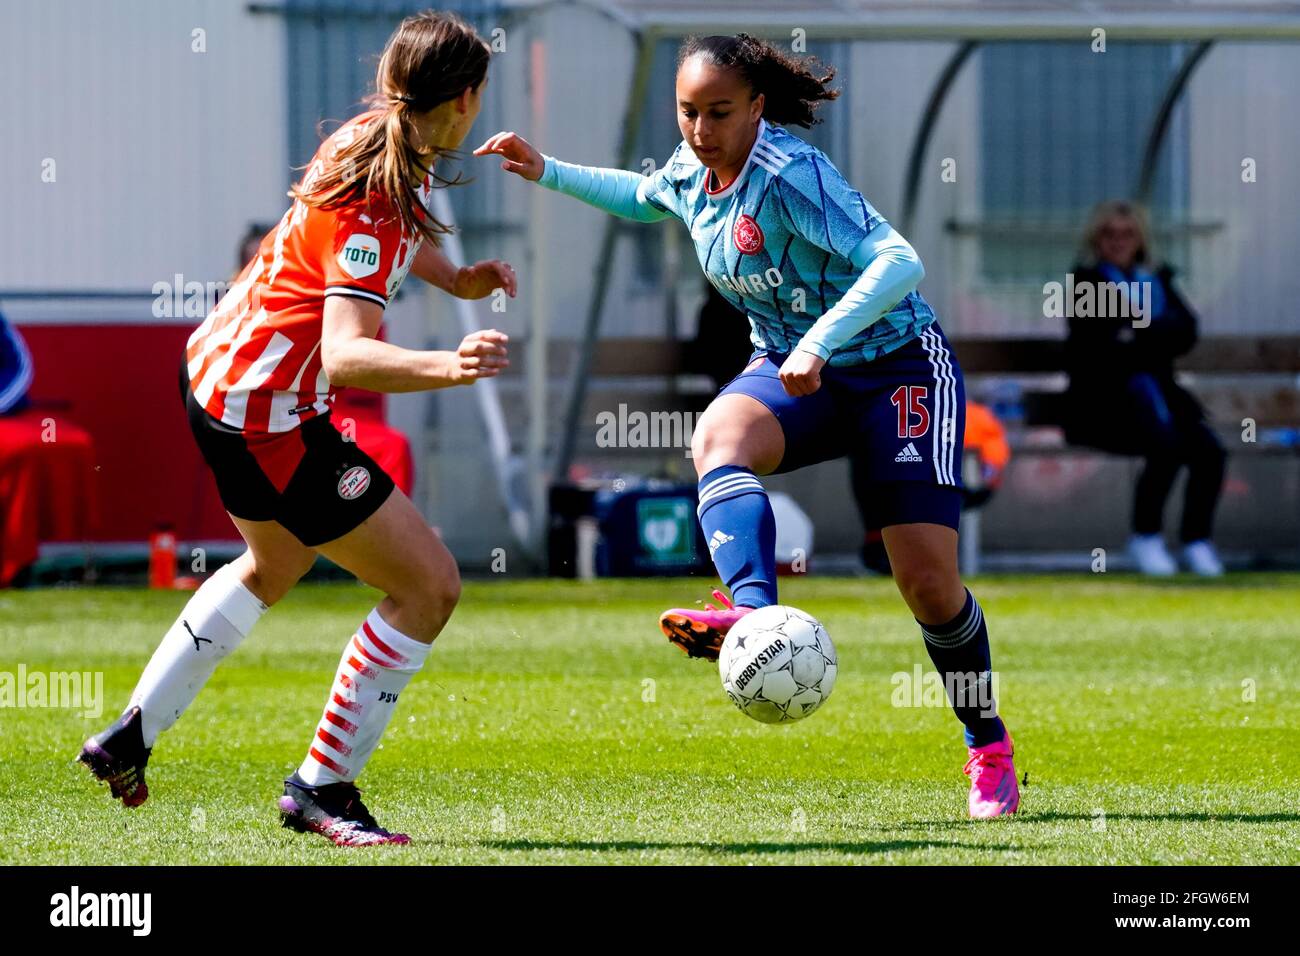 EINDHOVEN, NETHERLANDS - APRIL 25: Aniek Nouwen of PSV and Chasity Grant of Ajax during the Eredivisie Women match between PSV and Ajax at PSV Campus Stock Photo